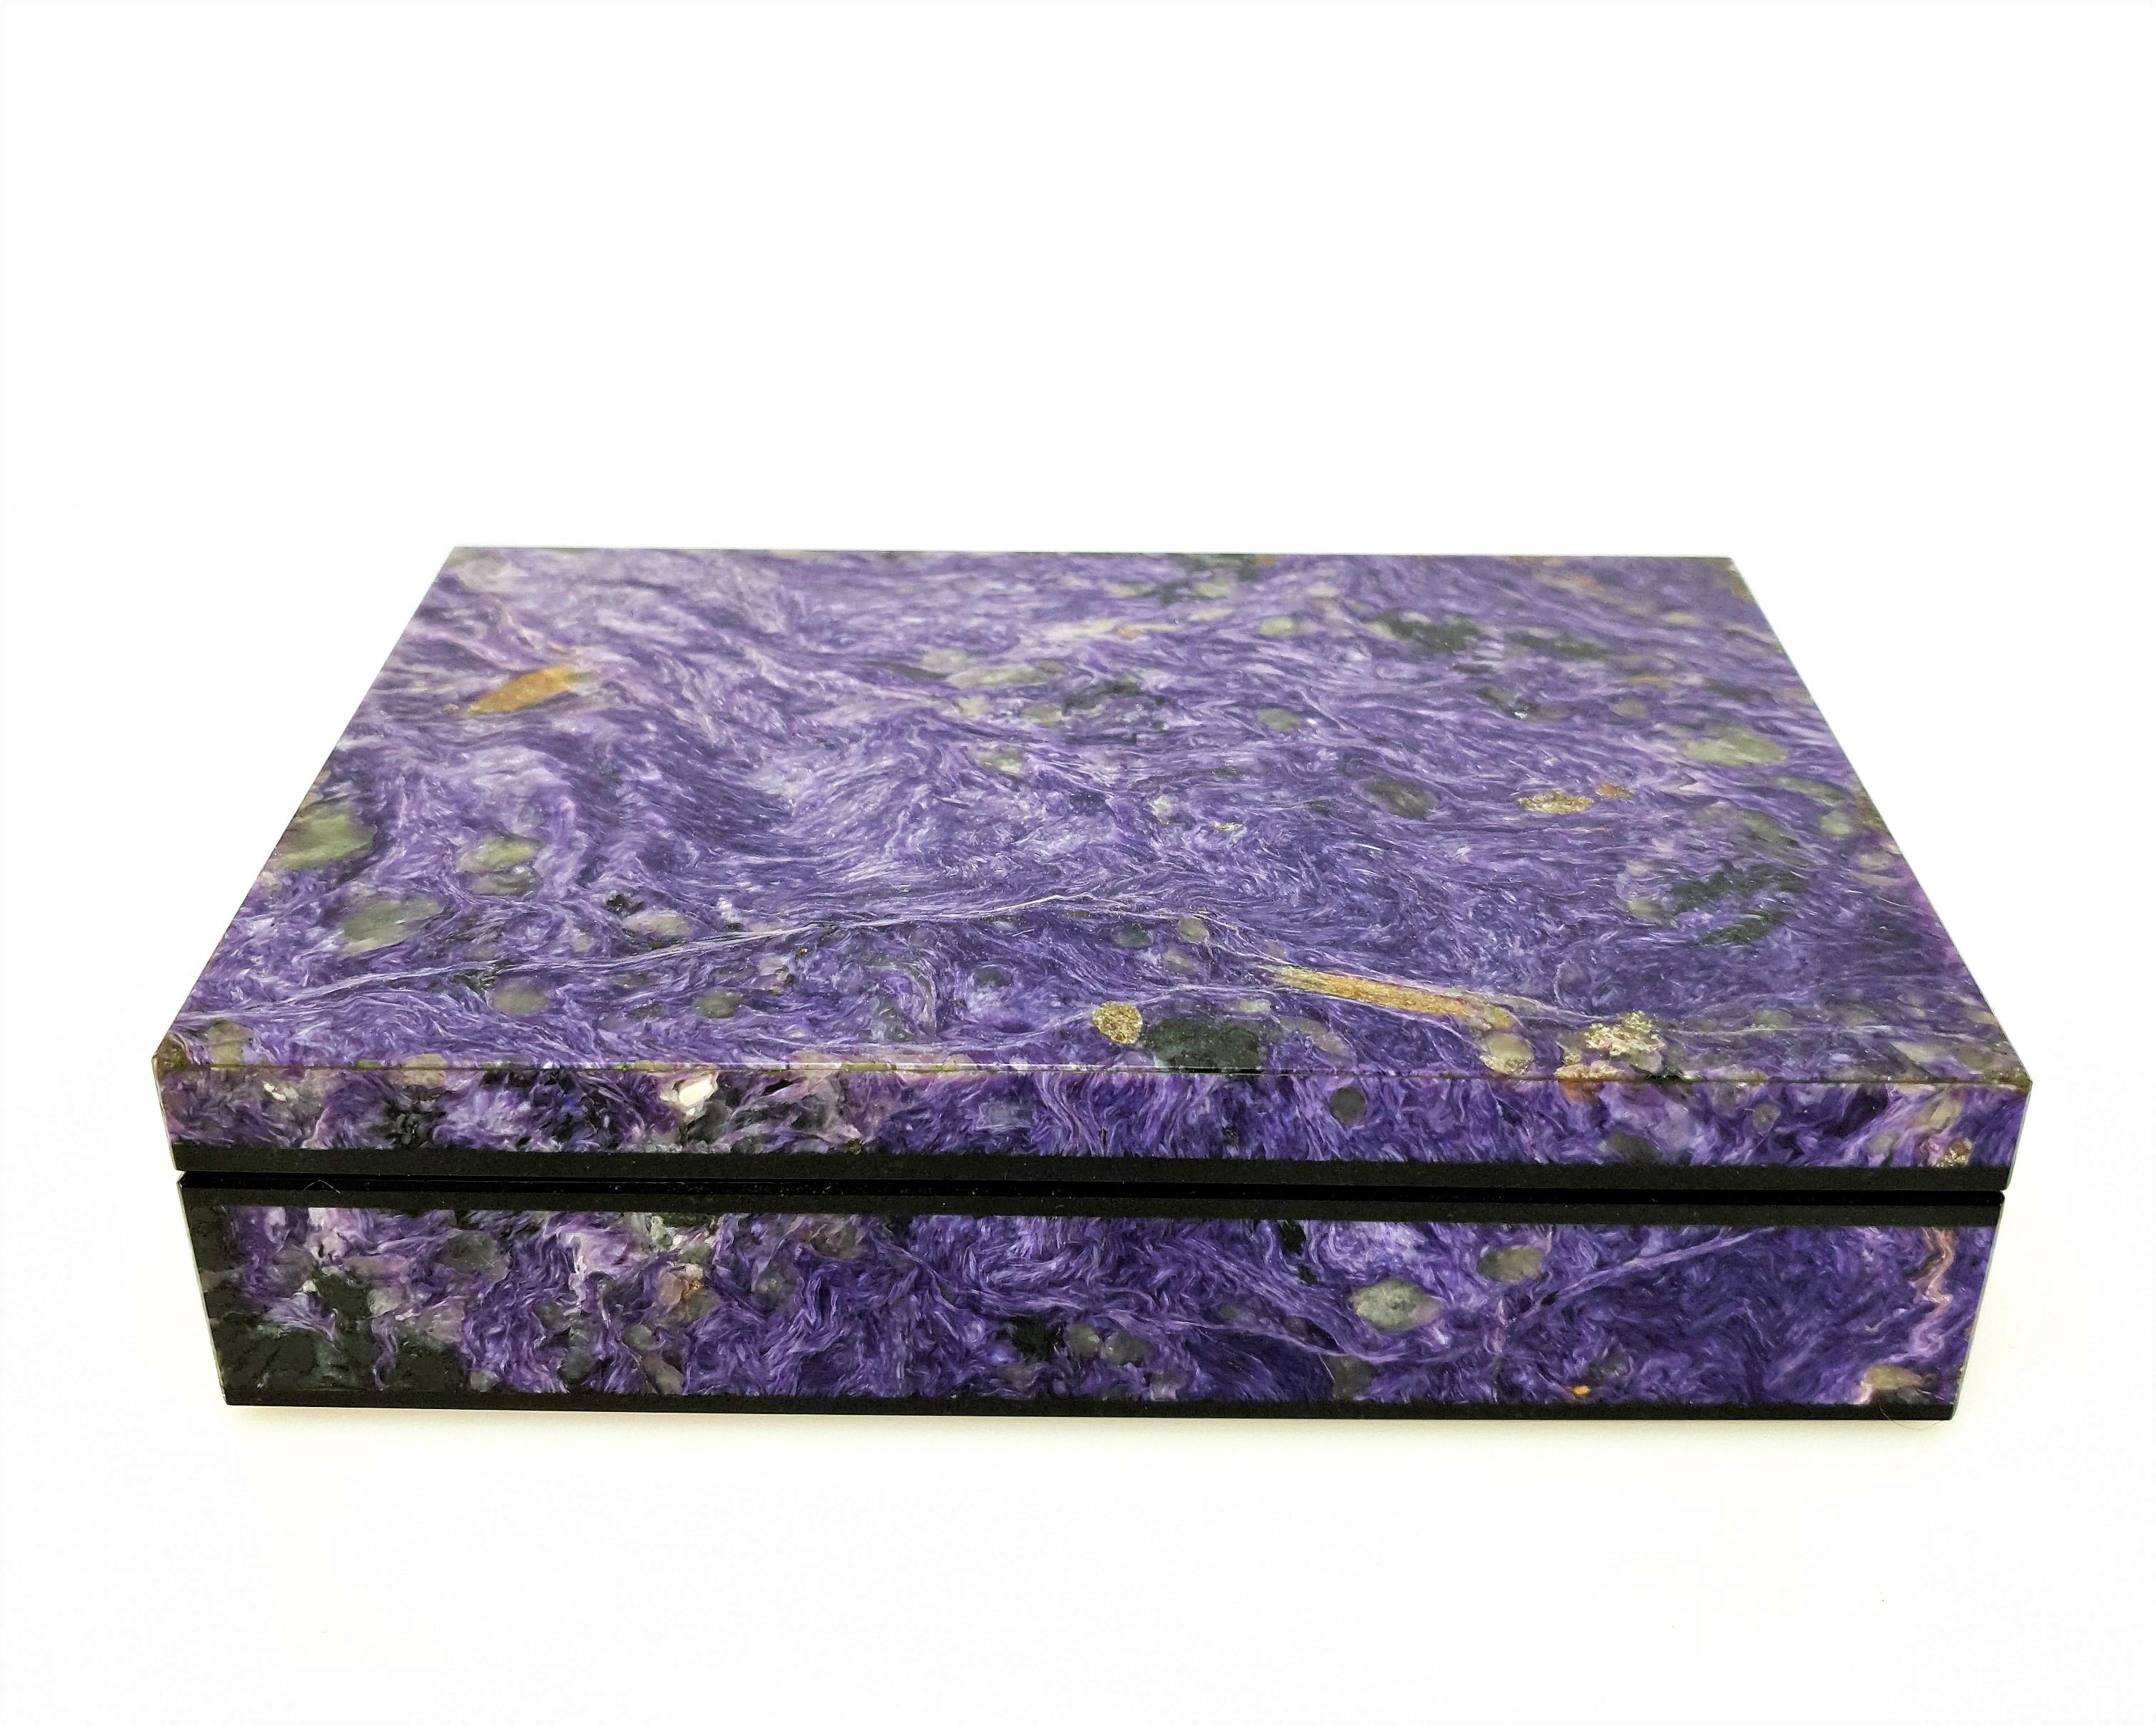 A handmade Natural Purple Charoite  decorative Jewelery Box.
The pattern looks like an artful painting of nature.
It should be emphasized that the top plate is made from one piece and not composed of many mosaics .
The Inlay is made out of natural